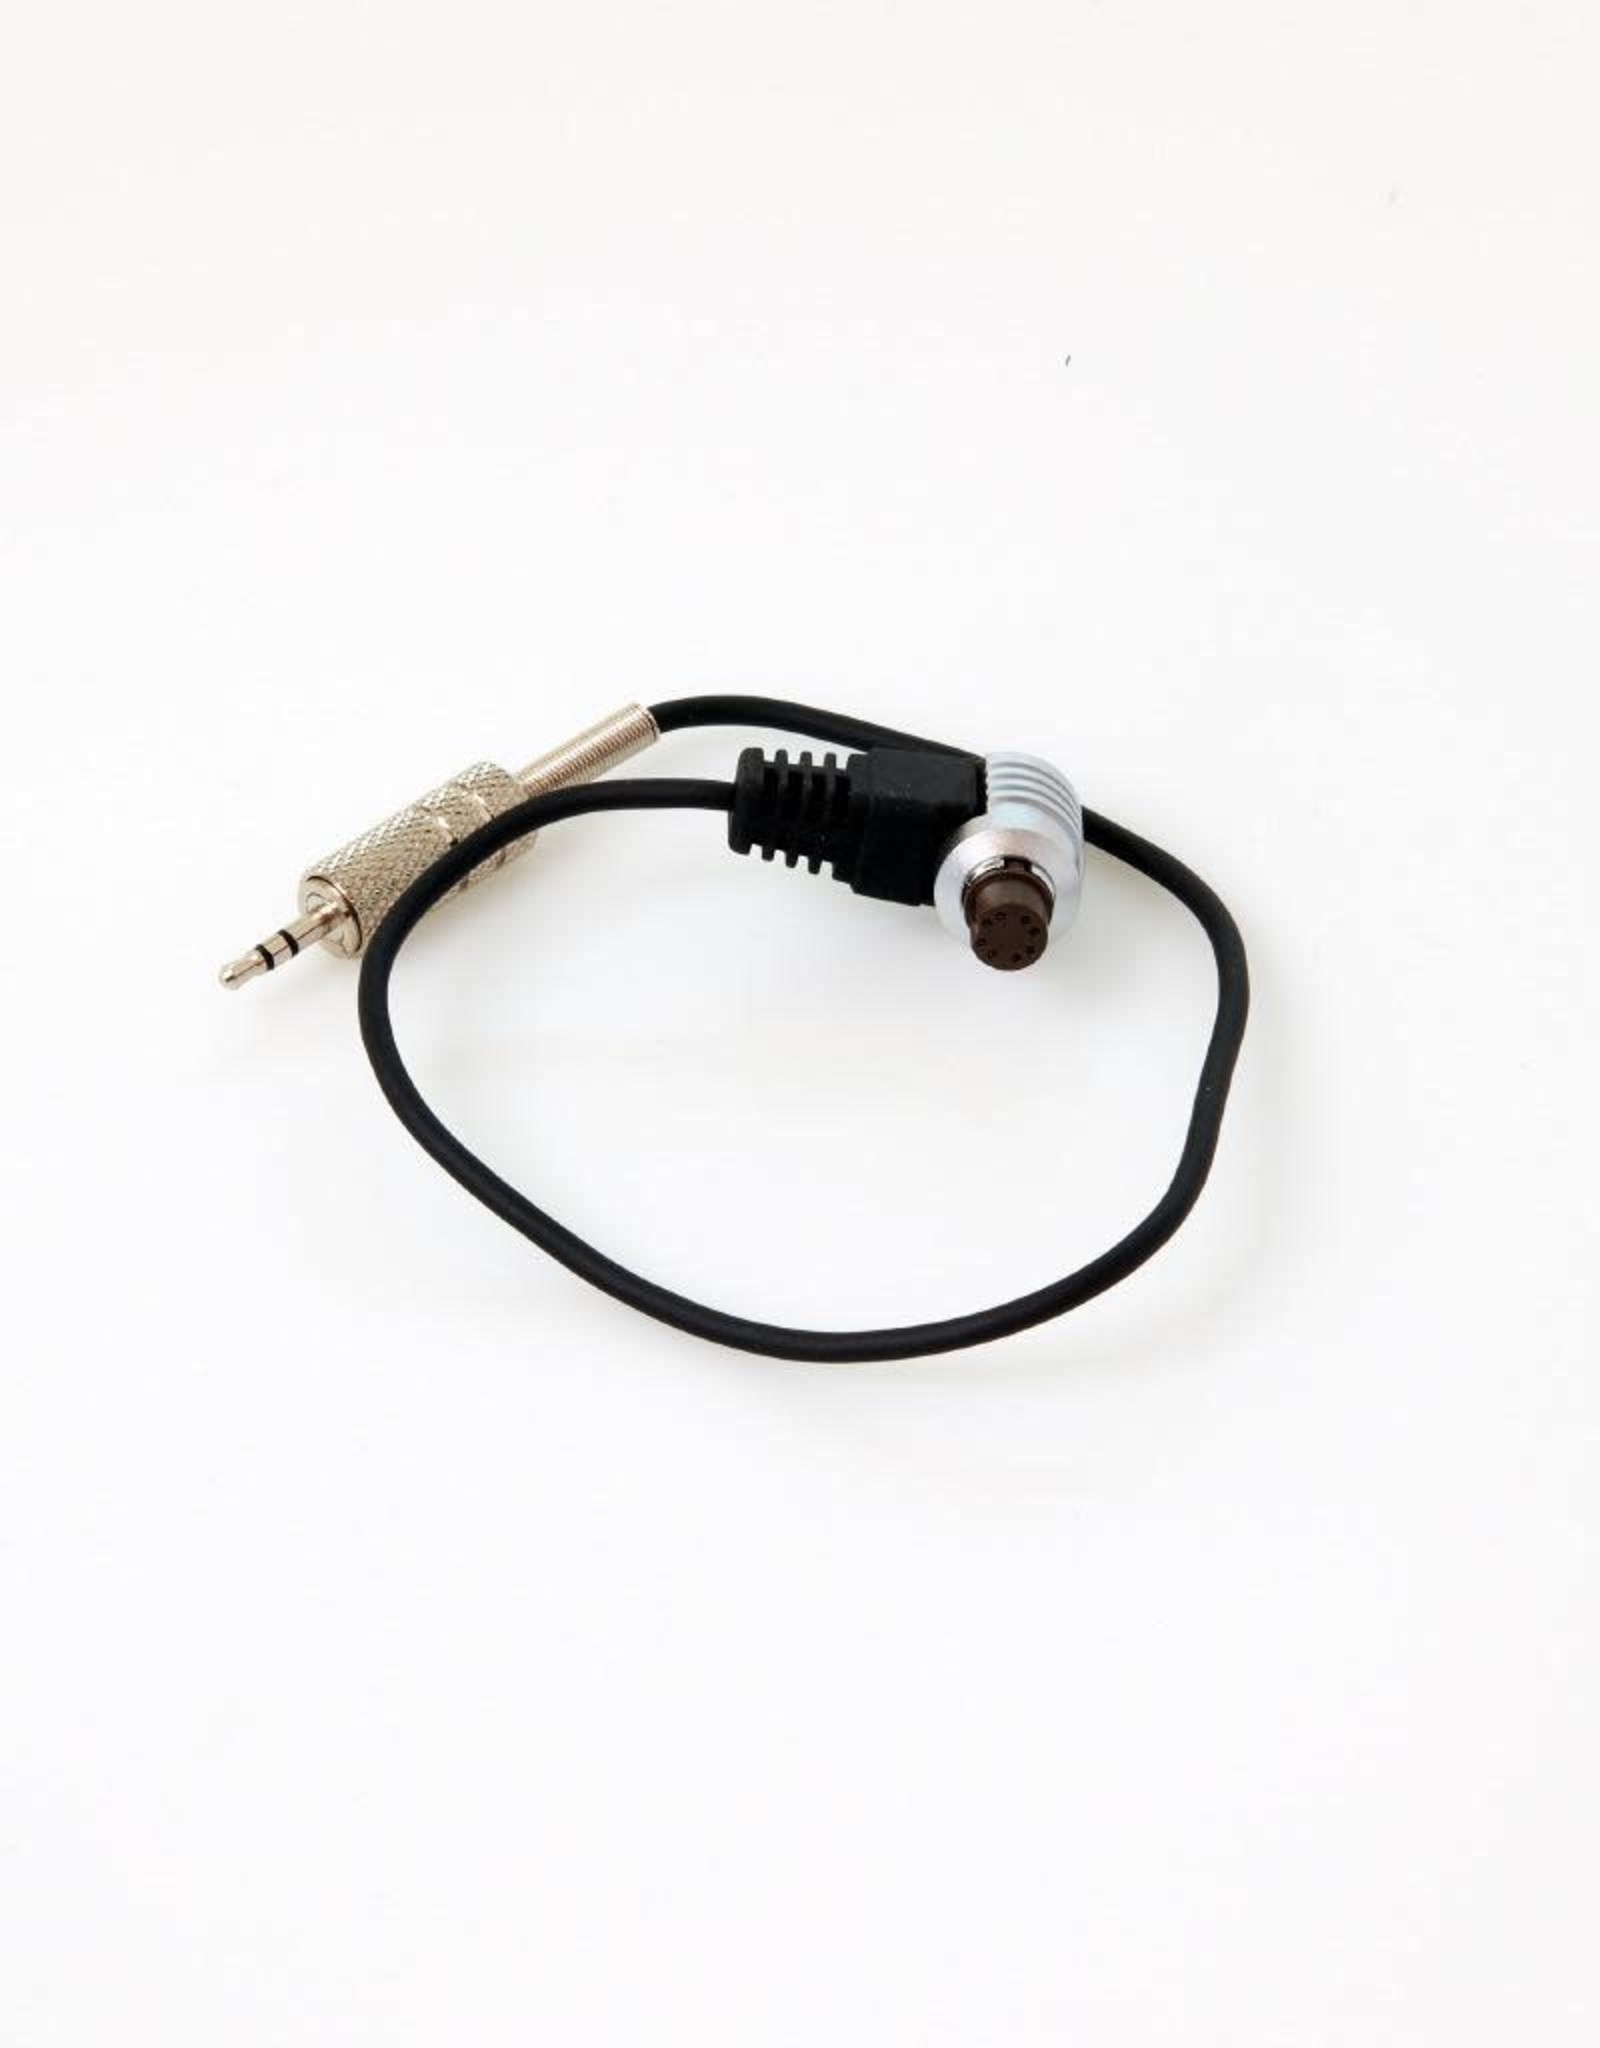 Phase One Phase One Motor Cable for Phase One P+ and IQ backs for Contax